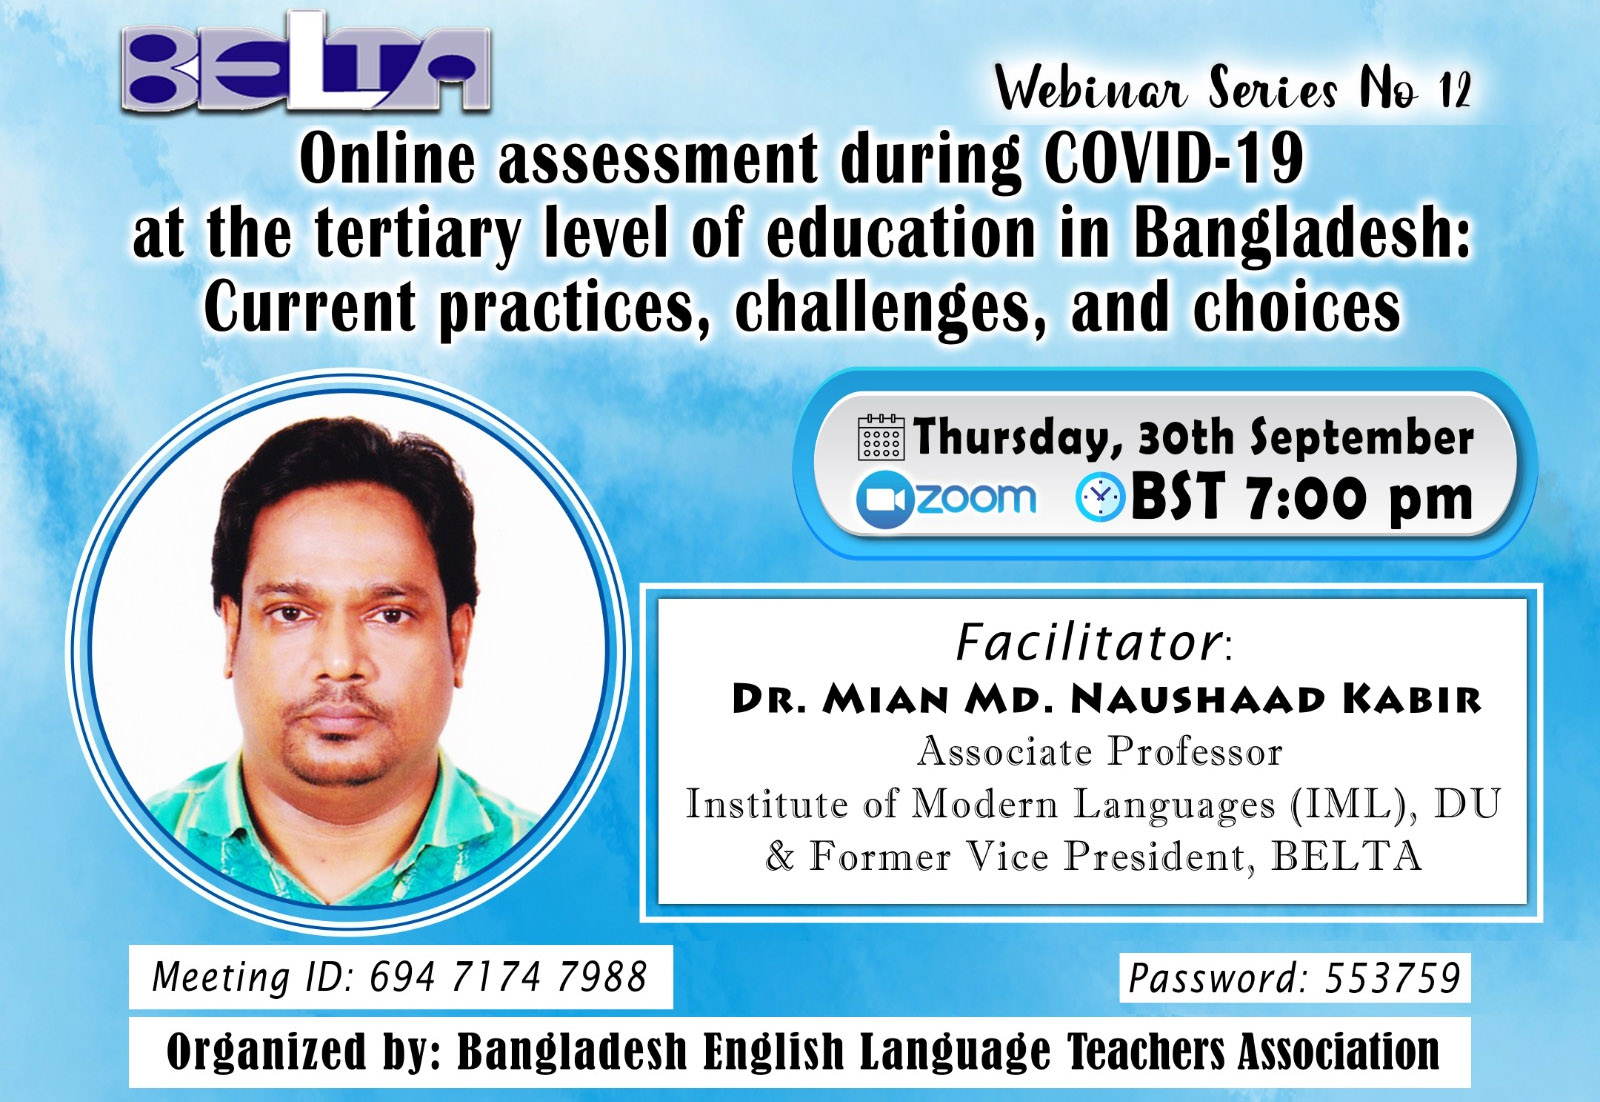 Online assessment during COVID-19 at the tertiary level of education in Bangladesh